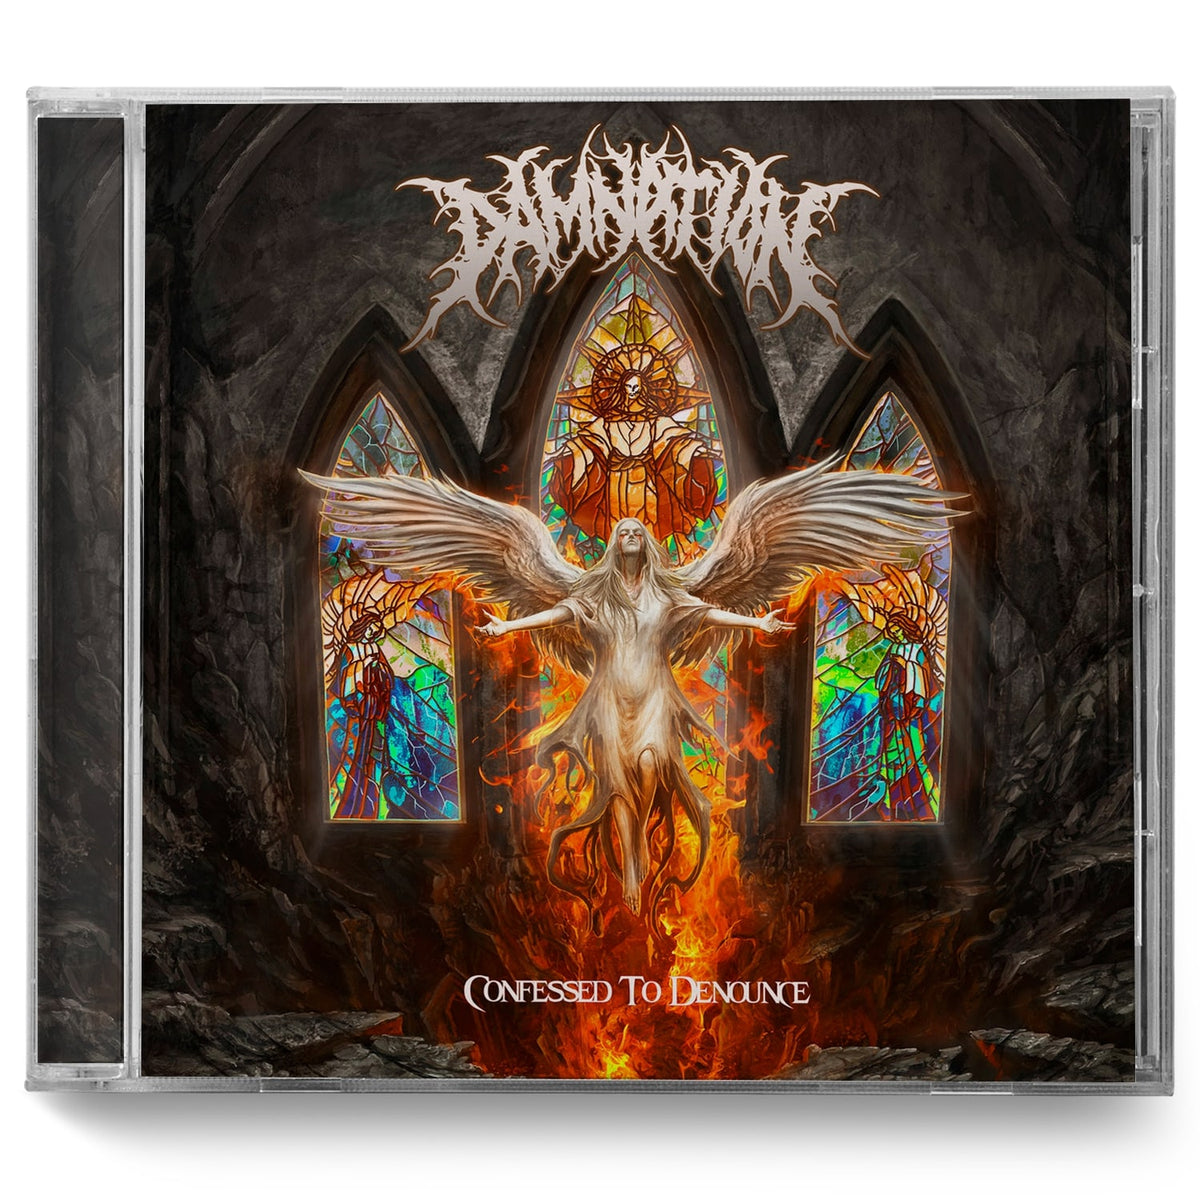 Damnation "Confessed to Denounce" CD - Miasma Records